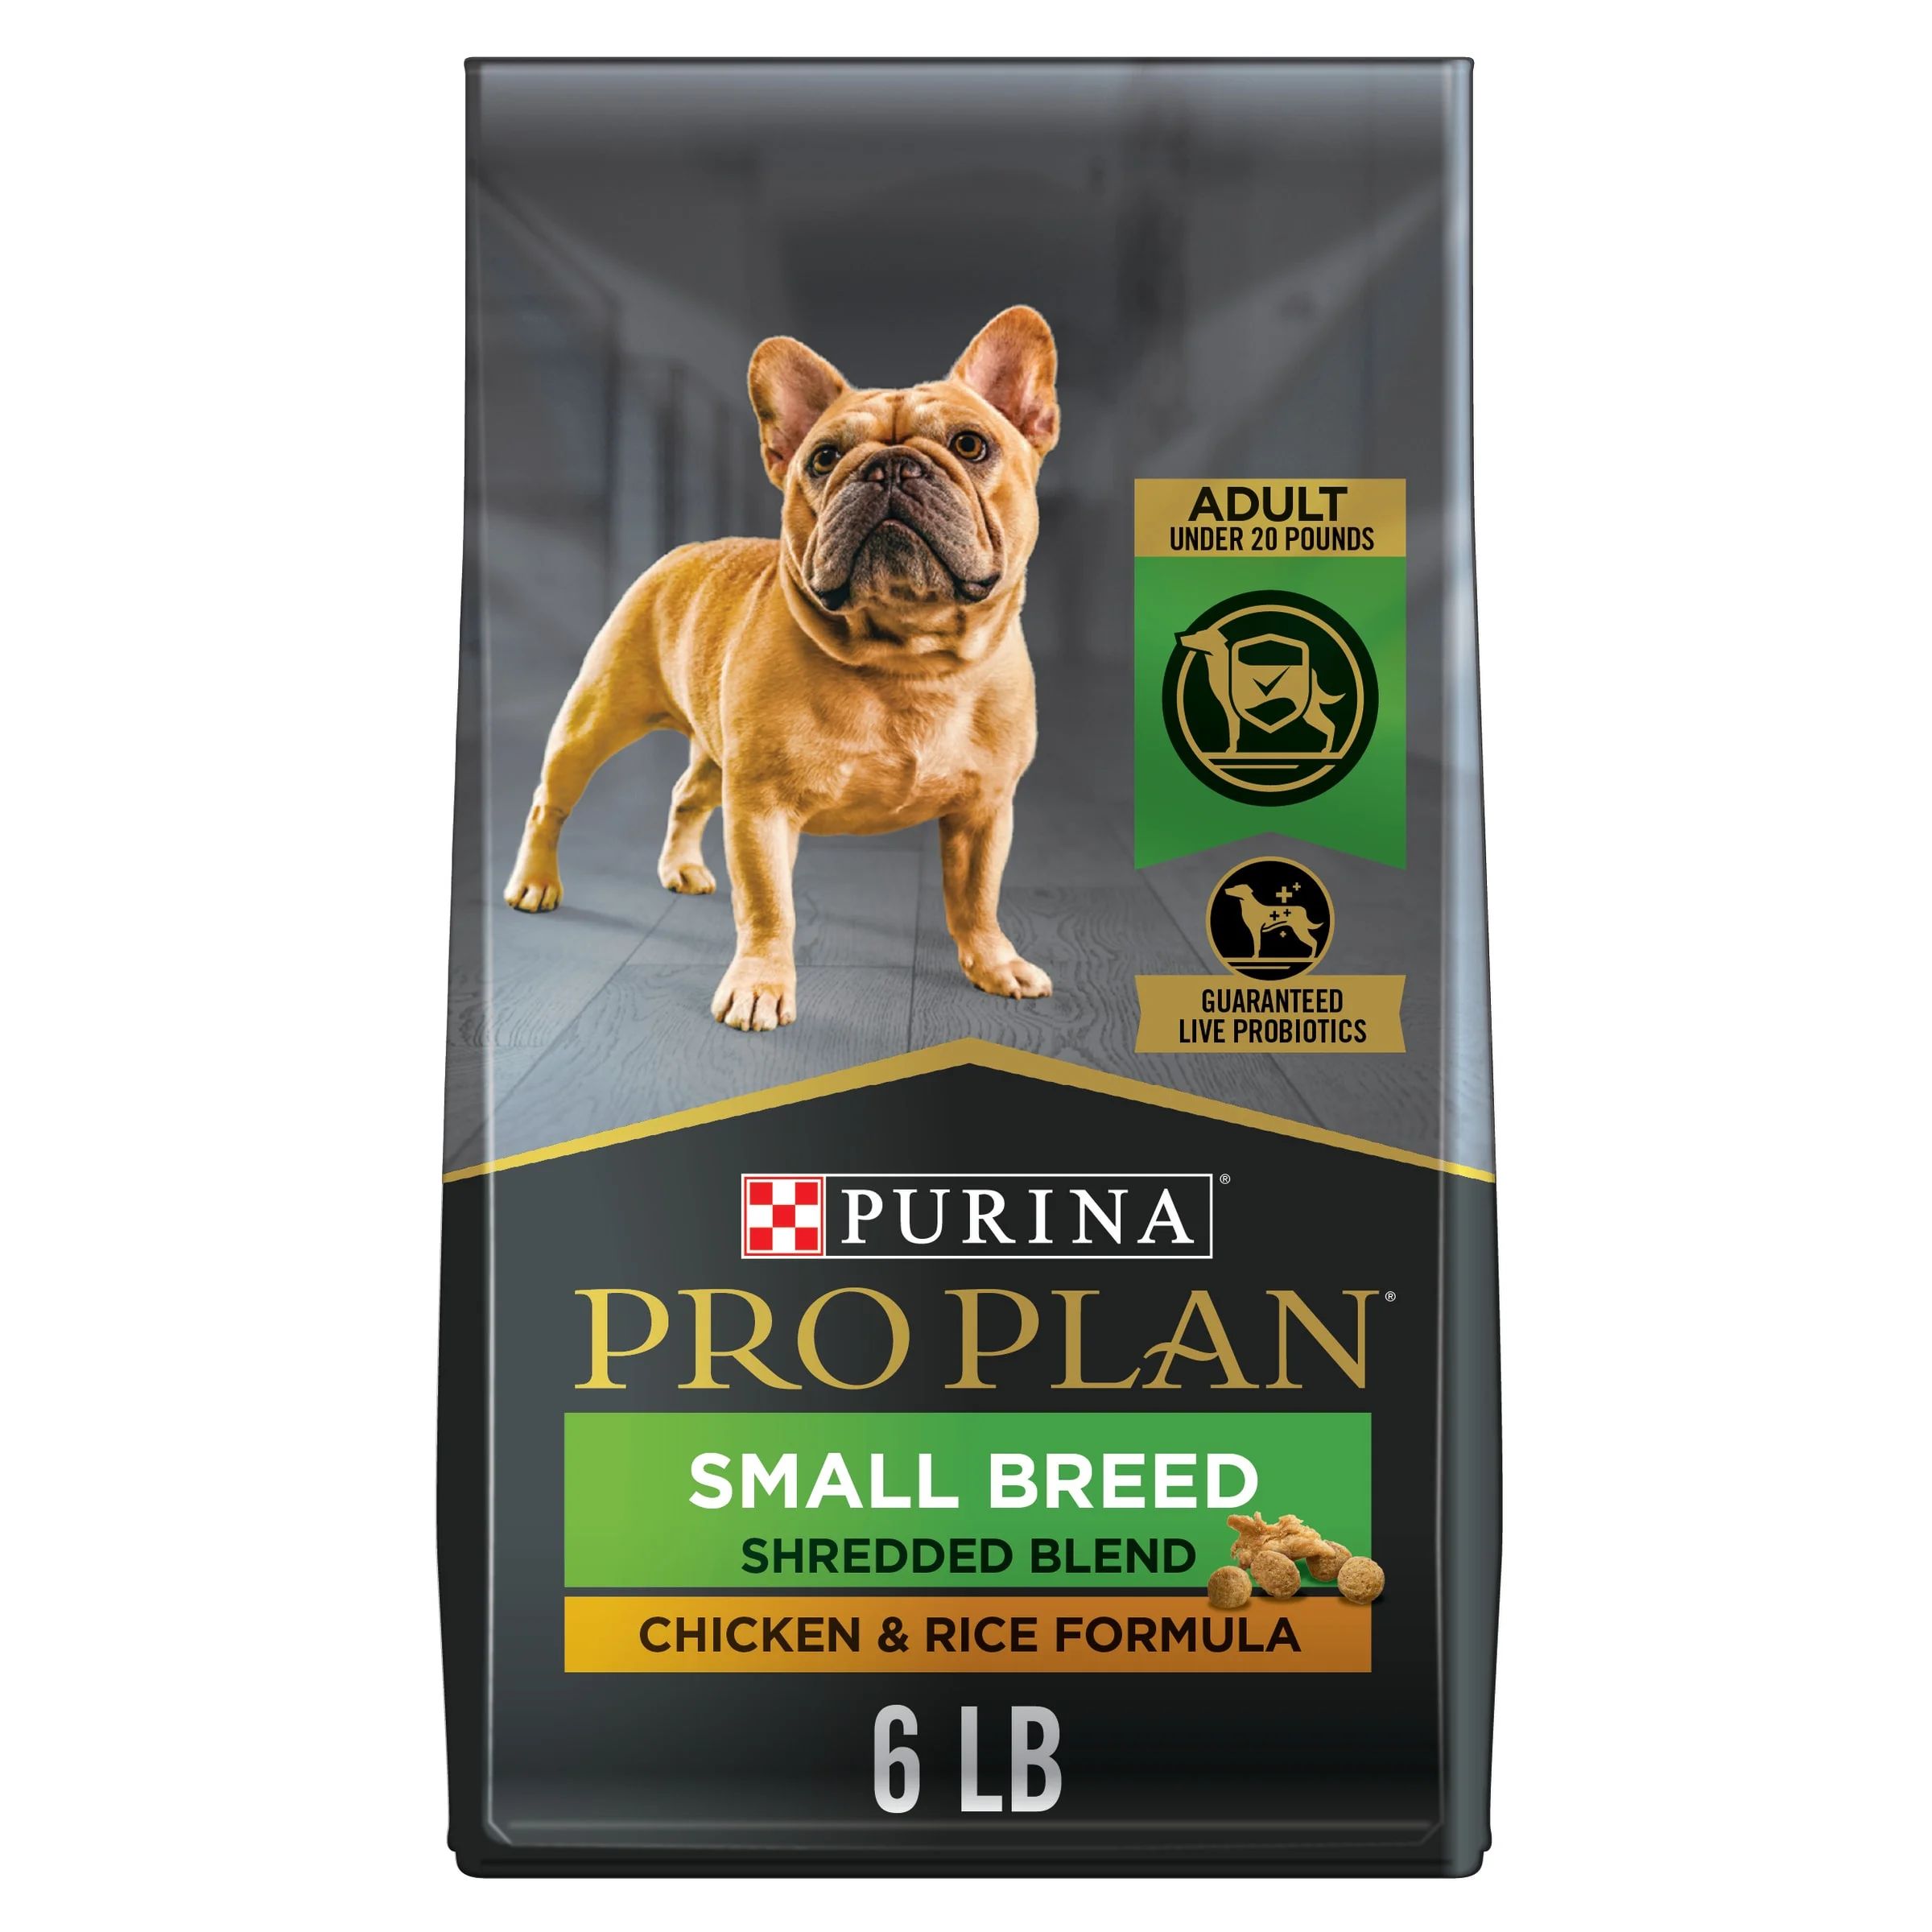 Purina Pro Plan Small Breed Dog Food With Probiotics for Dogs, Shredded Blend Chicken & Rice Form... | Walmart (US)